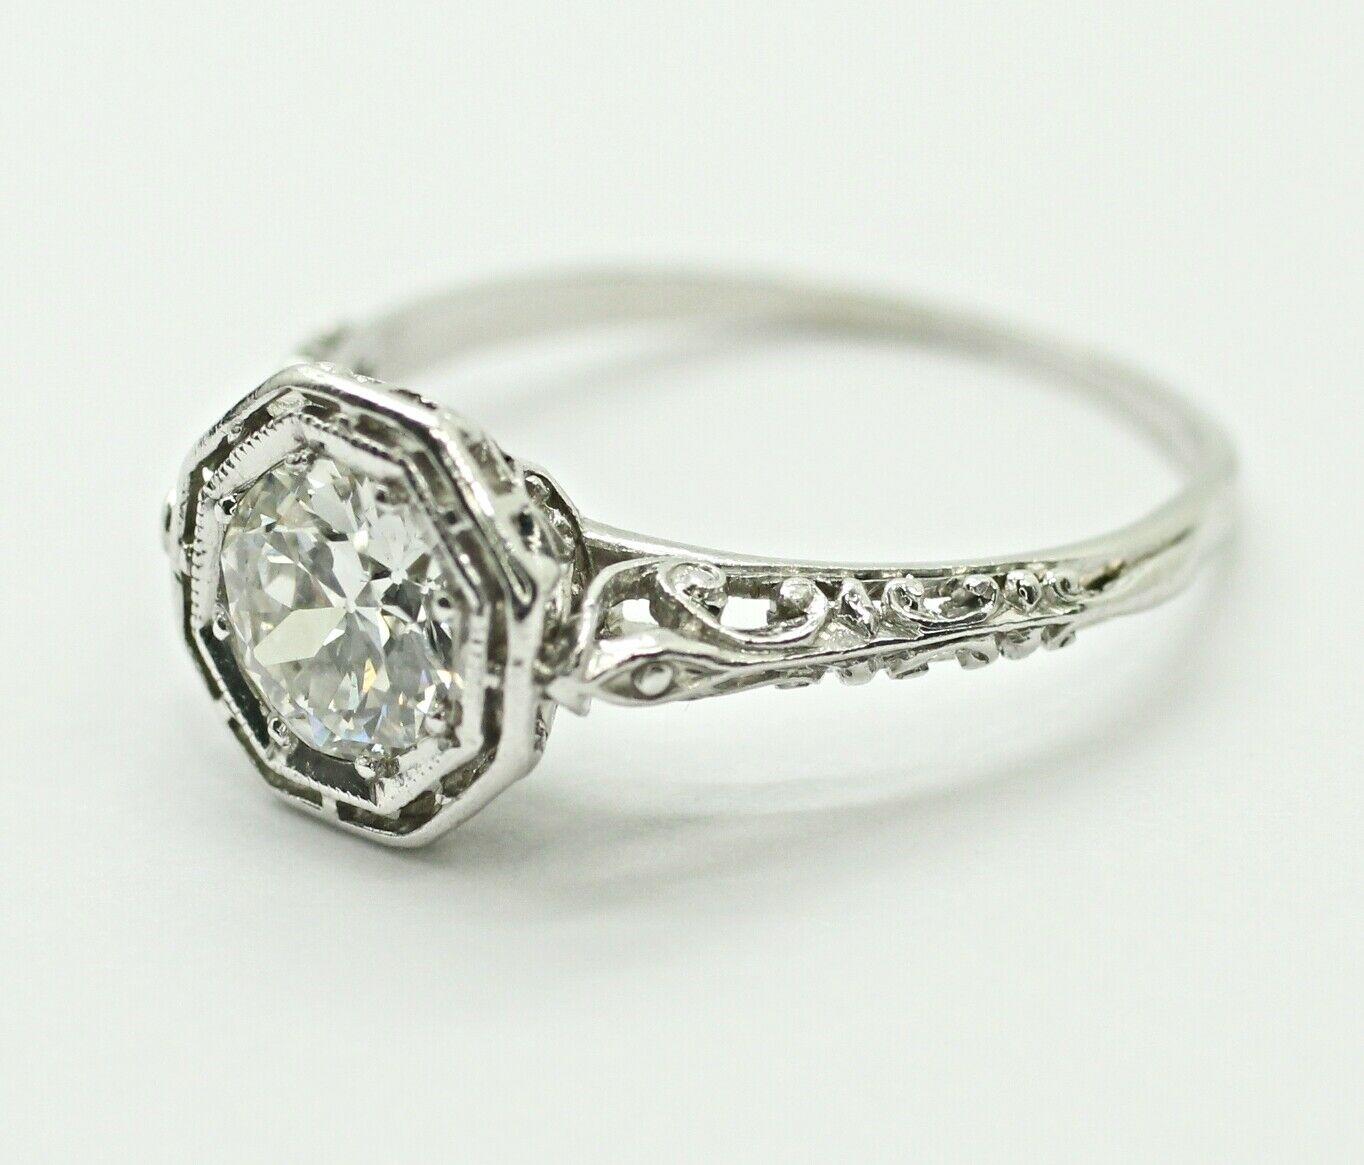  Classic Round old european cut diamonds in approximately 0.90 carat total weight in F color and SI1 in stone clarity. This ring has a art deco style band in PLATINUM.
Specifications:
    main stone: ROUND OLD EUROPEAN CUT
    diamonds: 1 PC
   